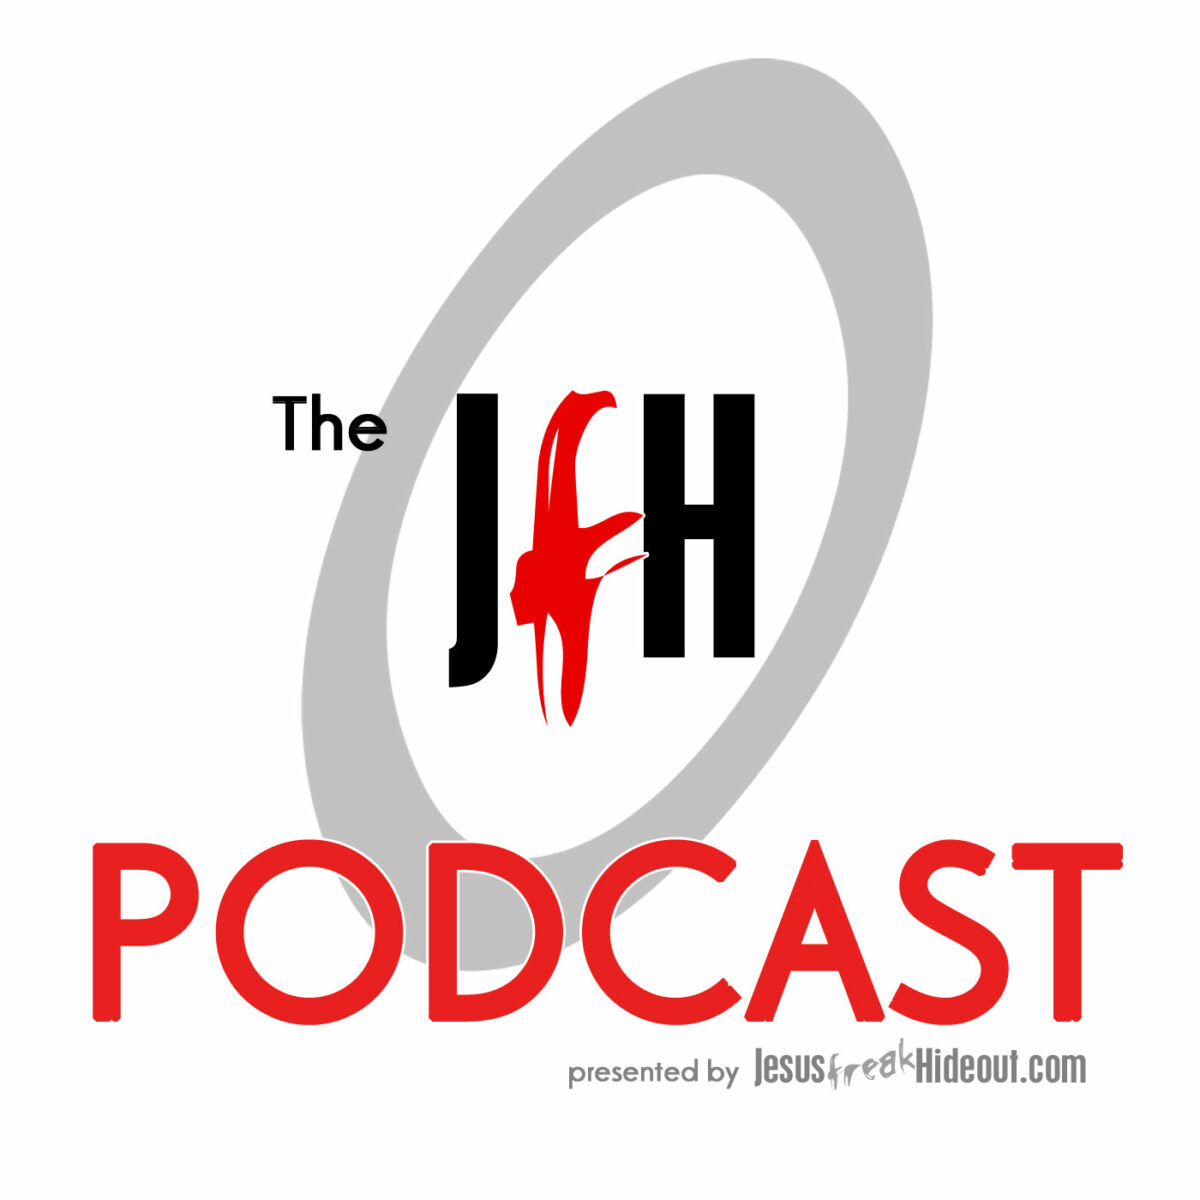 The JFH Podcast 211: 211: From Violence to Loriella (feat. My Epic)